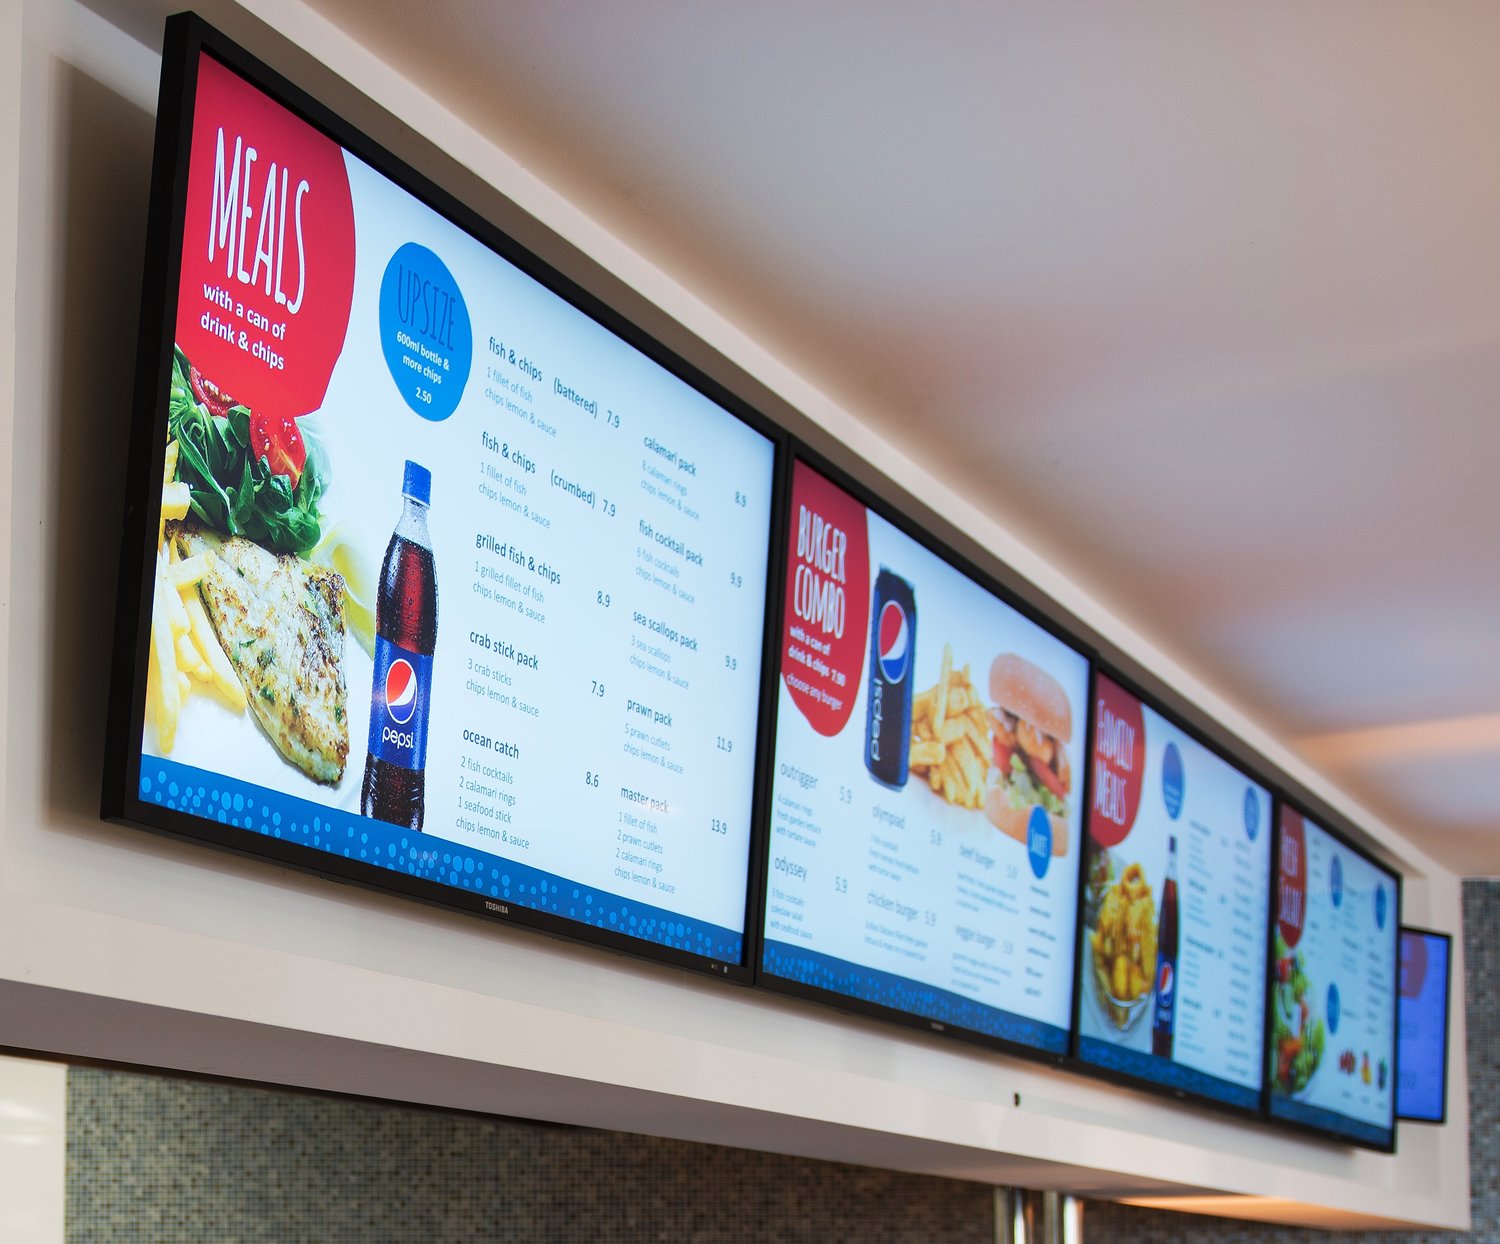 How to boost your business with a digital signage?